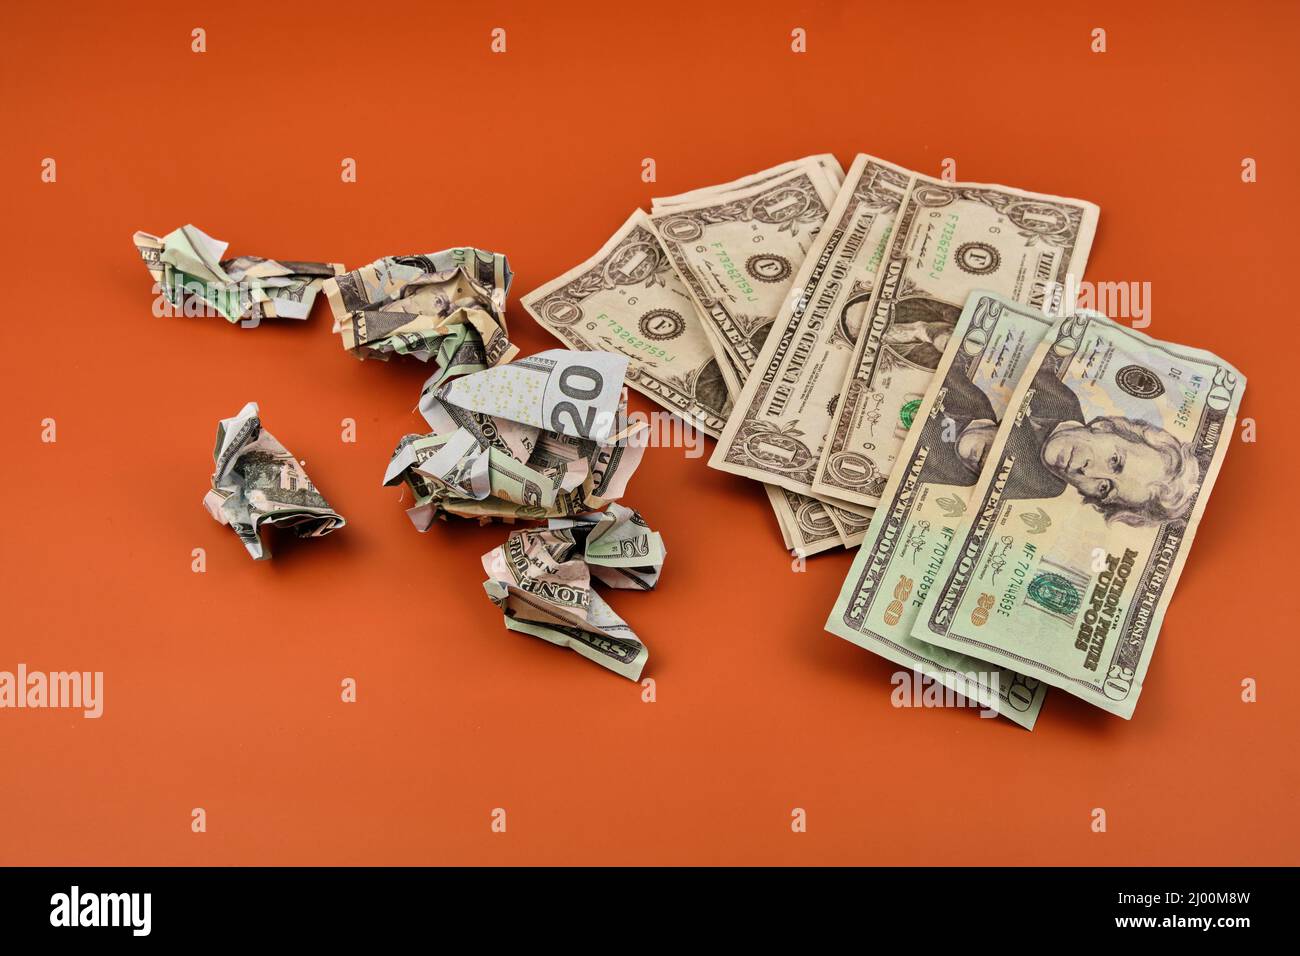 A pile of crumpled and dirty dollar bills lying on an orange table. Dirty money concept. Stock Photo